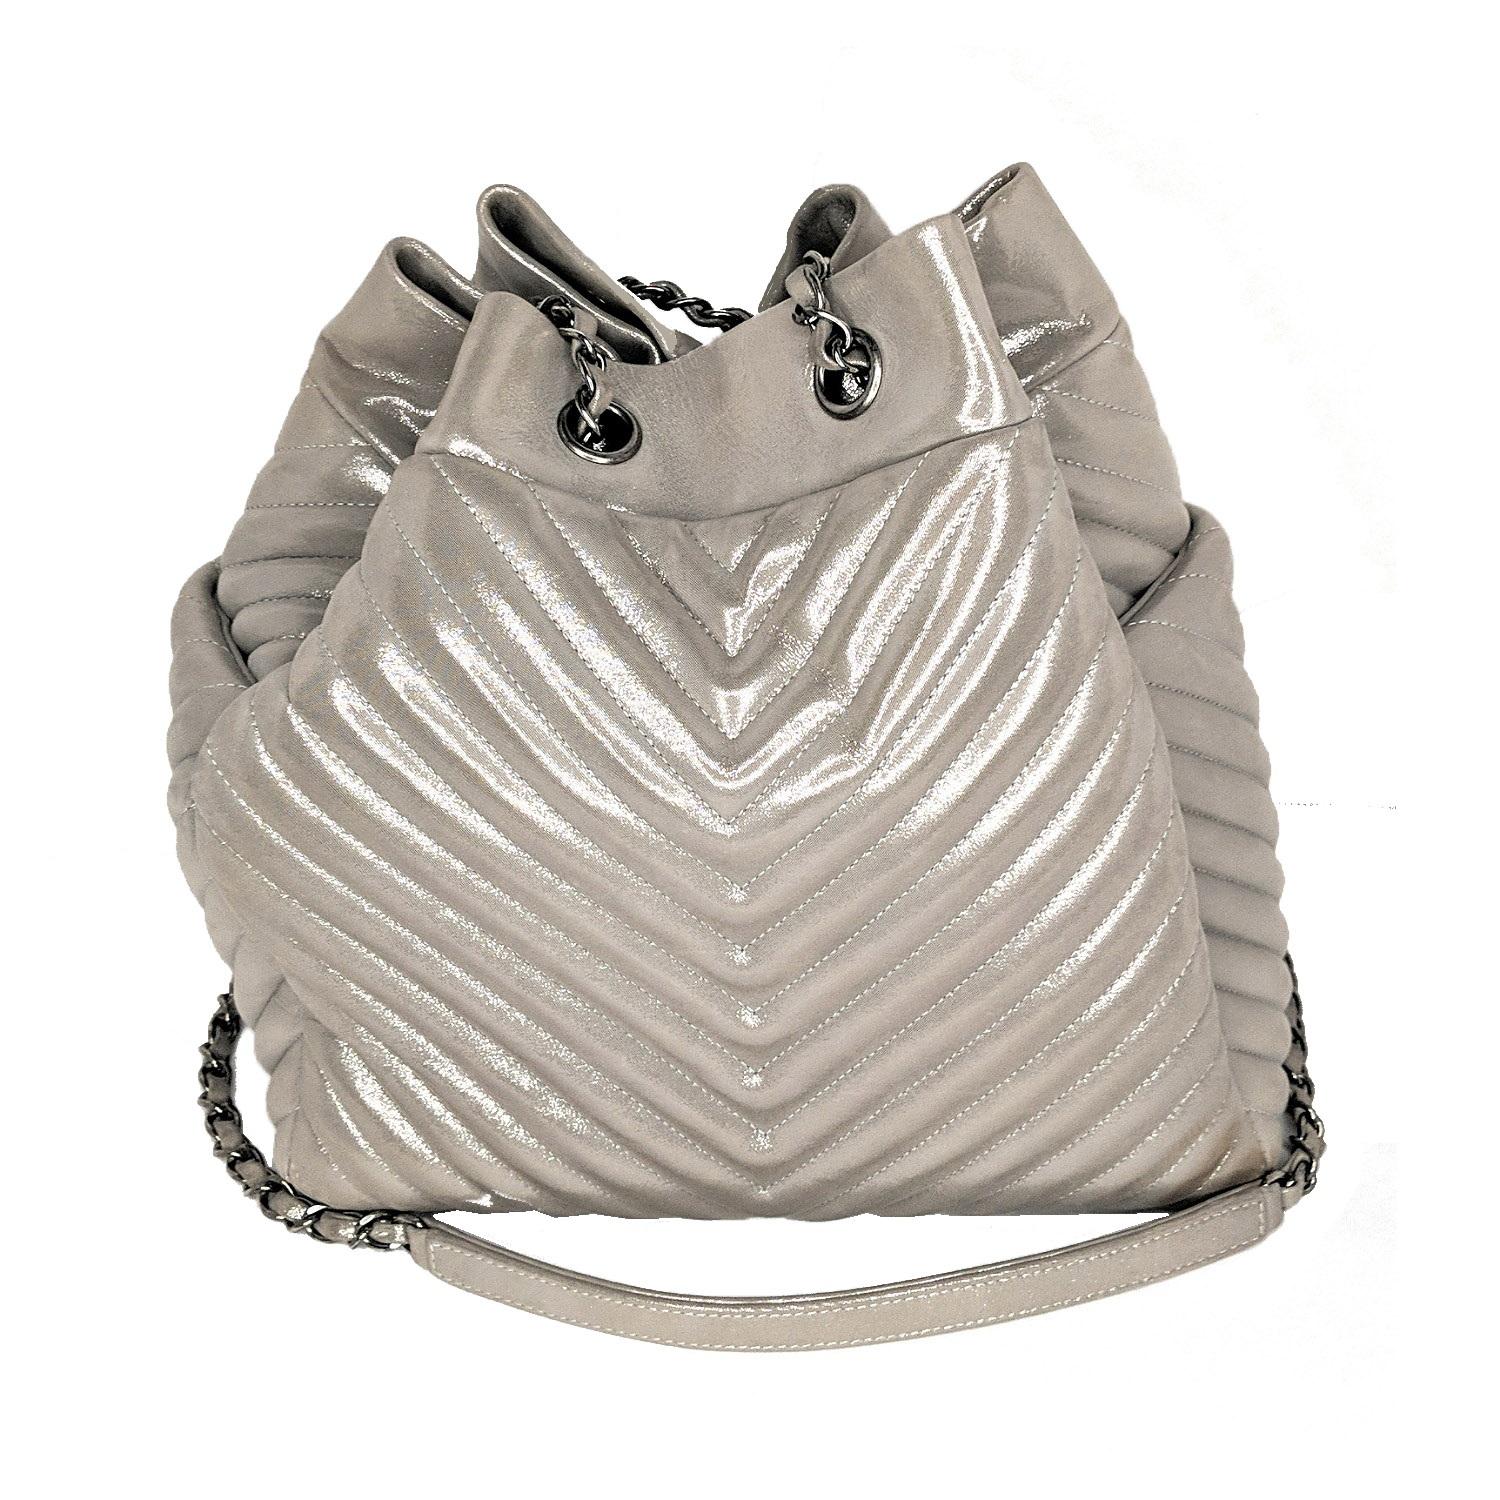 From the Spring/Summer 2016 Act 2 Bag Collection. Iridescent silver-tone chevron quilted leather Chanel Large Urban Spirit bucket bag with ruthenium hardware, single chain-link and leather shoulder strap with leather shoulder guard, interlocking CC